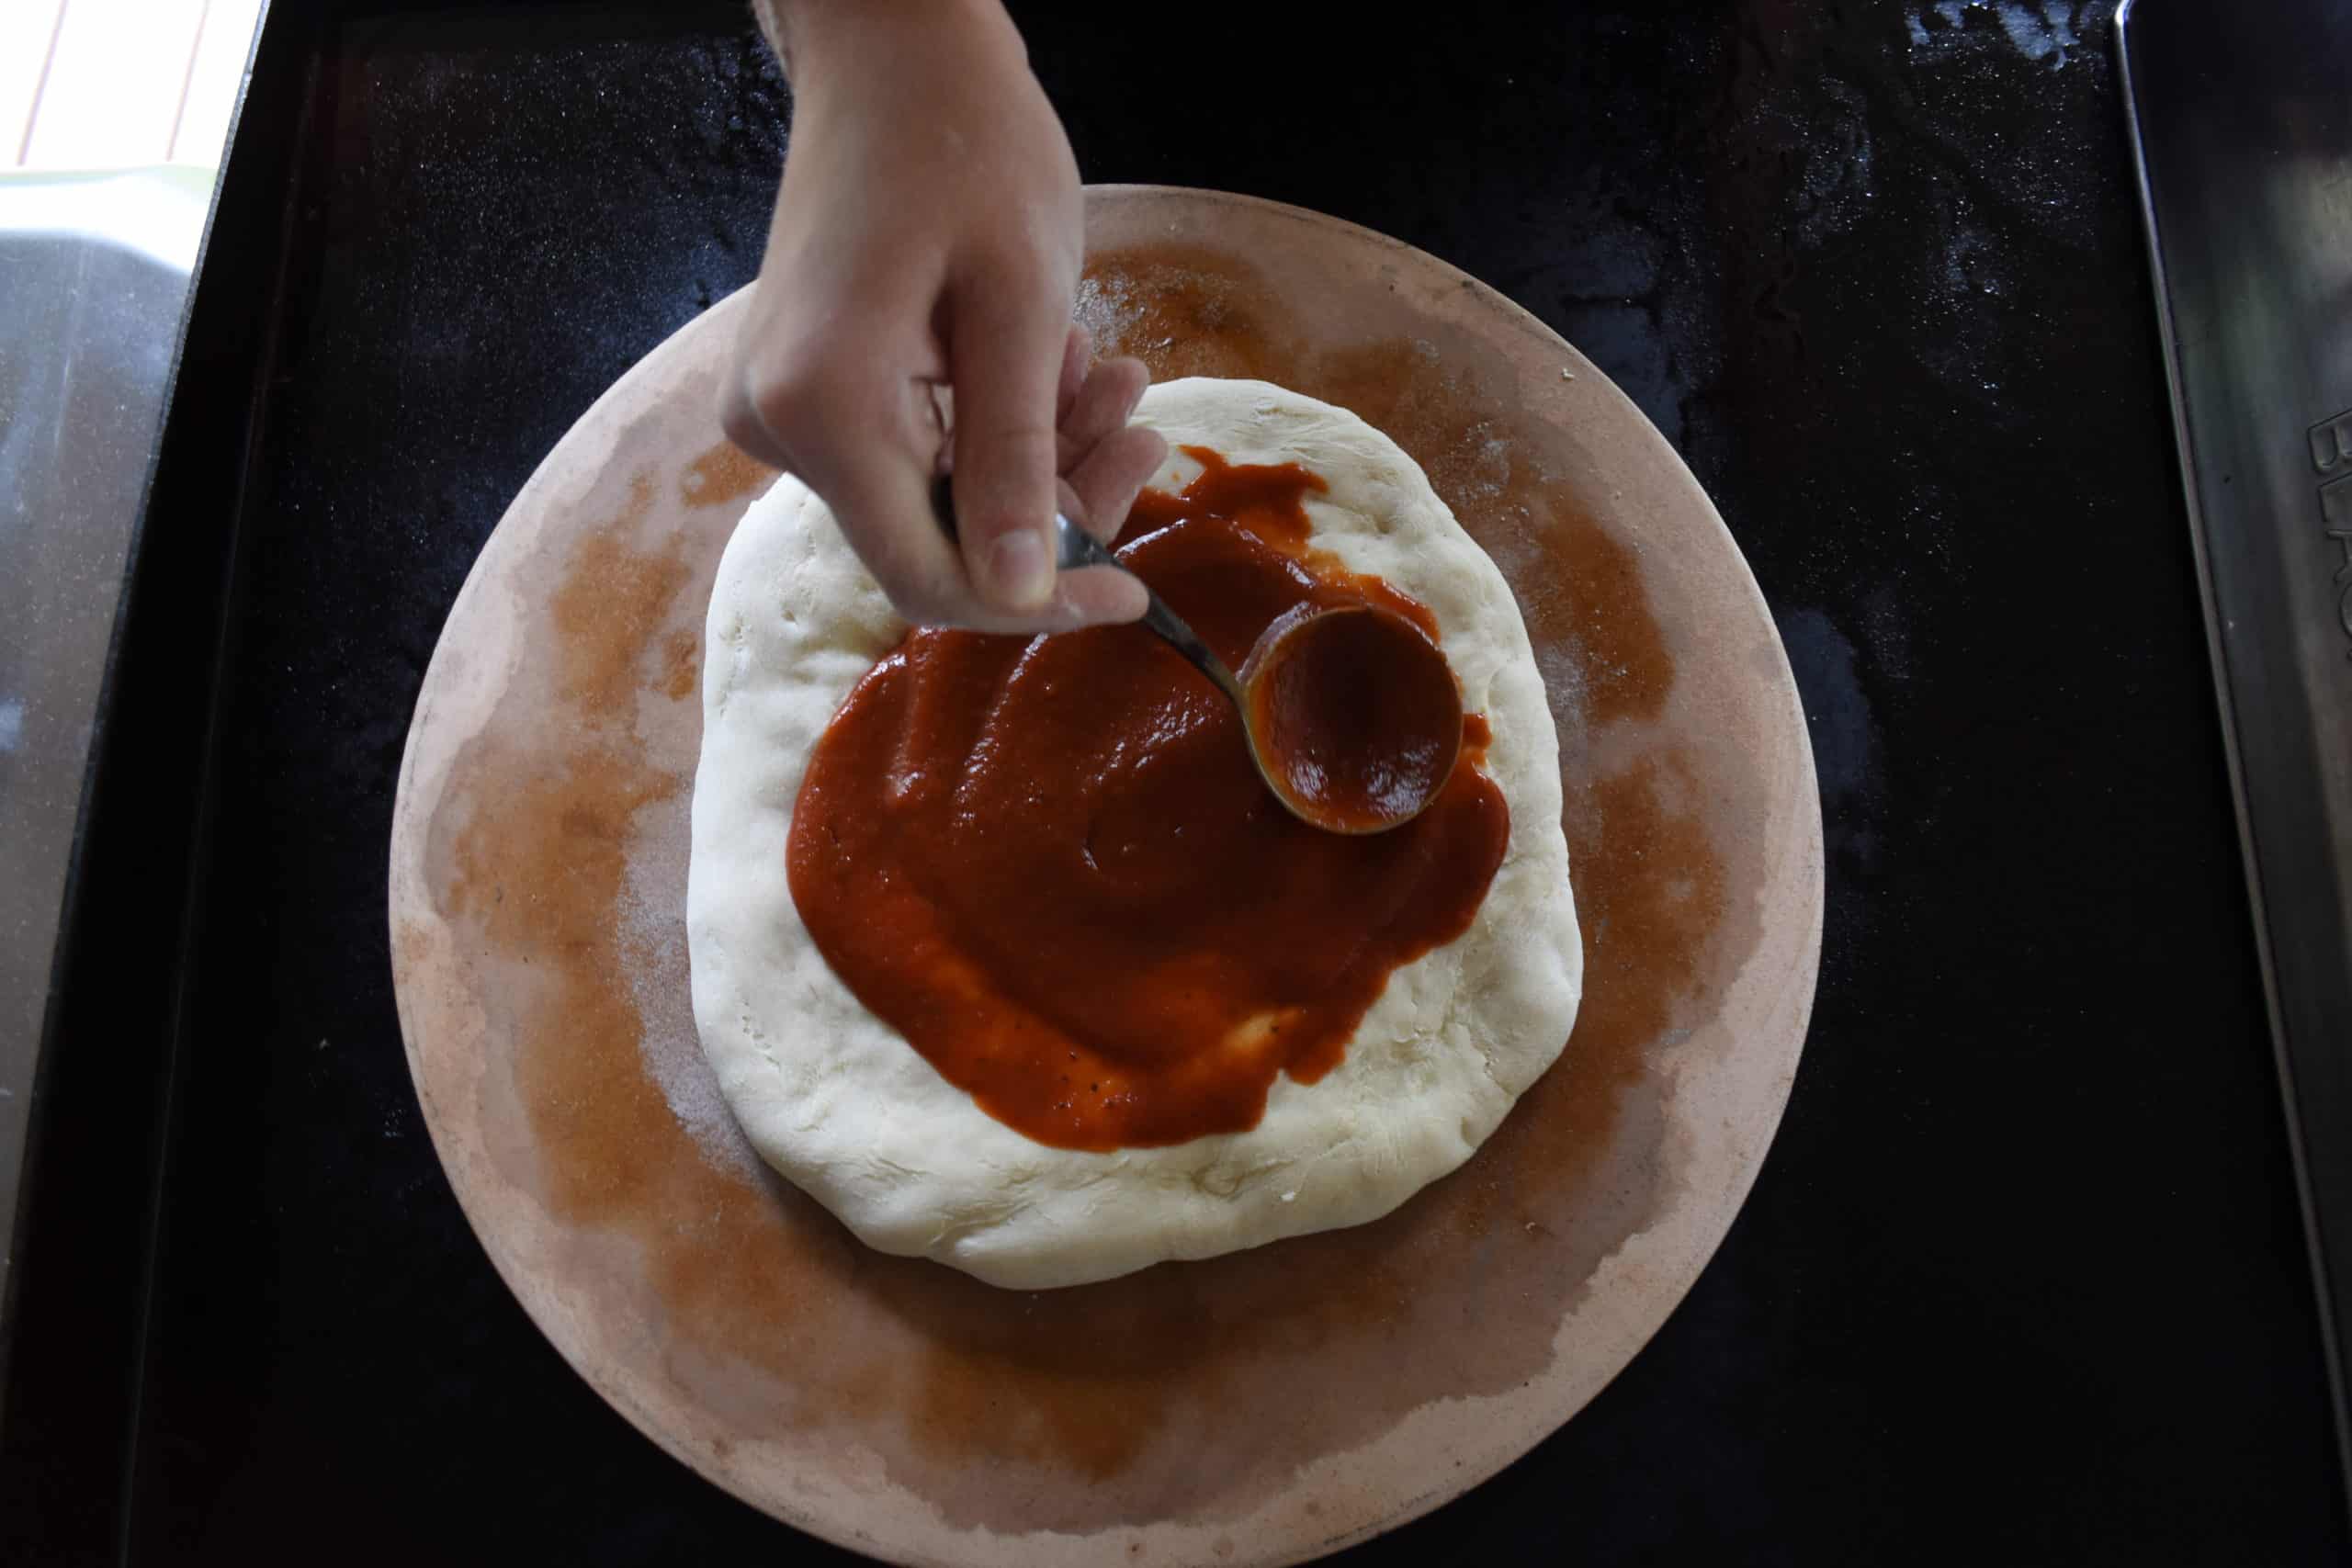 Spreading pizza sauce on to the round pizza dough.